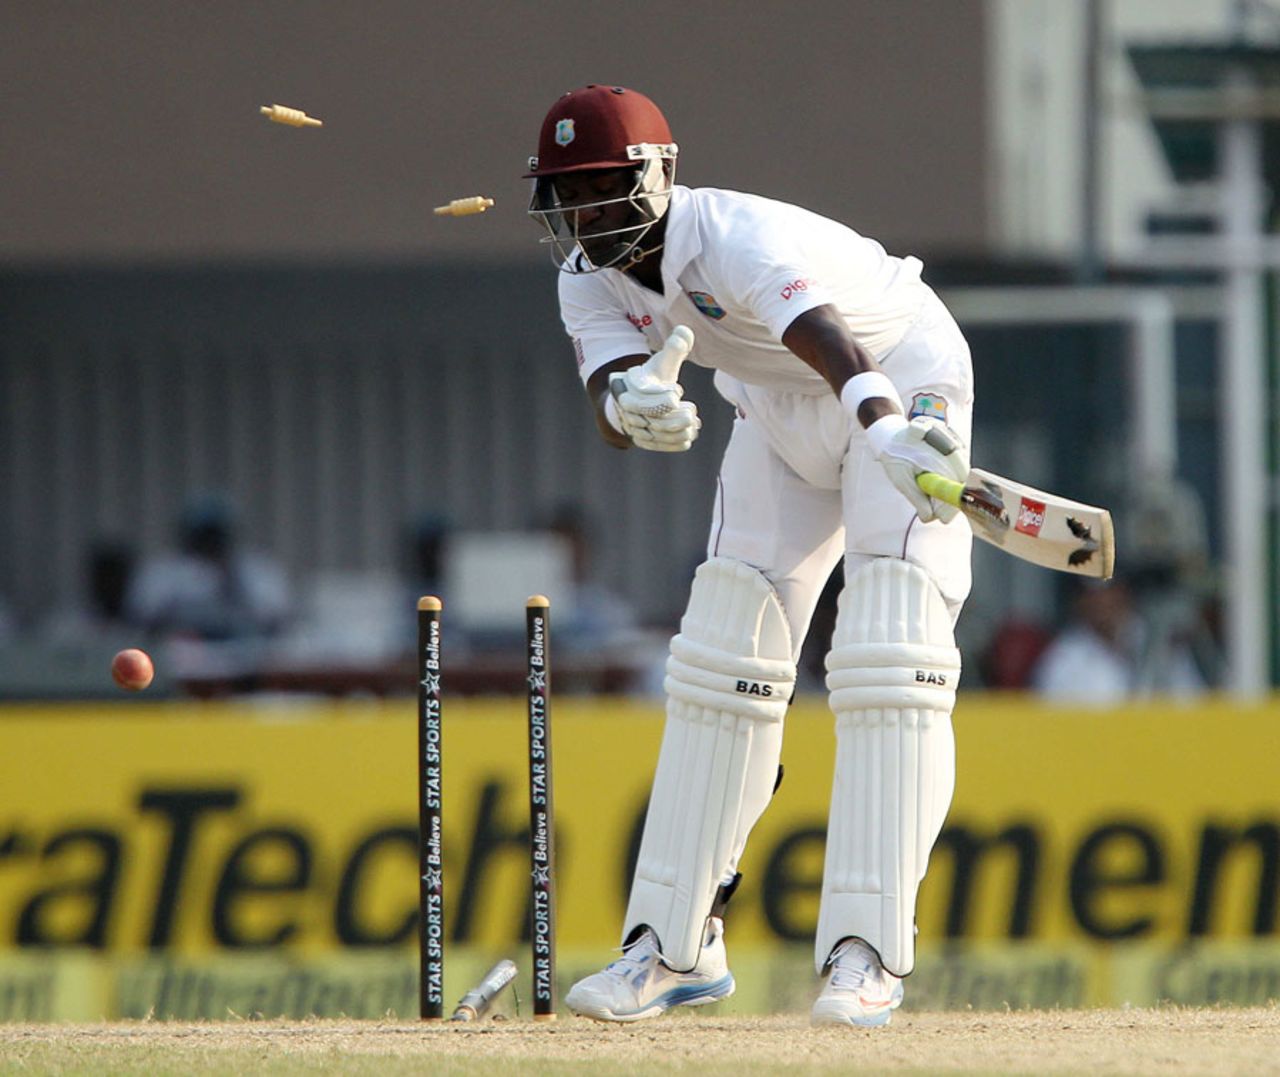 Darren Sammy had no reply to Mohammed Shami's pace and swing, India v West Indies, 1st Test, Kolkata, 3rd day, November 8, 2013